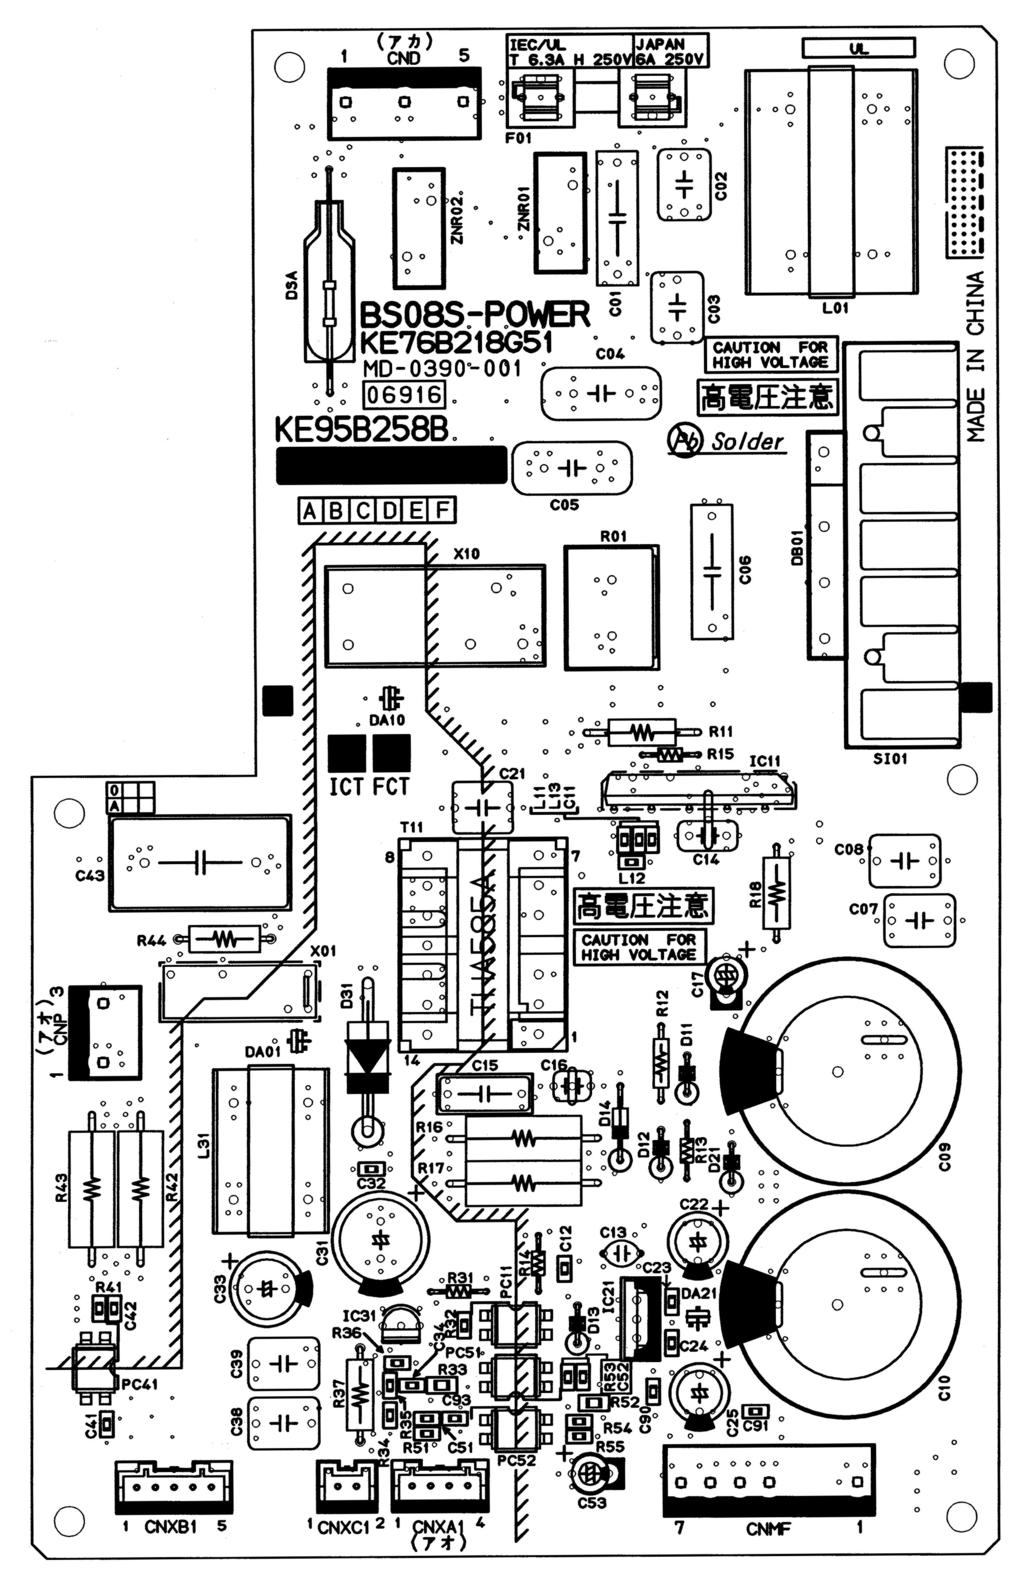 HWE170.qxd 17.7.12 :09 Page 35 9-5. TEST POINT DIAGRAM 9-5-1. Power supply board CND CND Power supply voltage (220-2VAC) CNMF Fan motor output 1-4: 3-3 VDC 5-4: 15 VDC 6-4: 0-6.